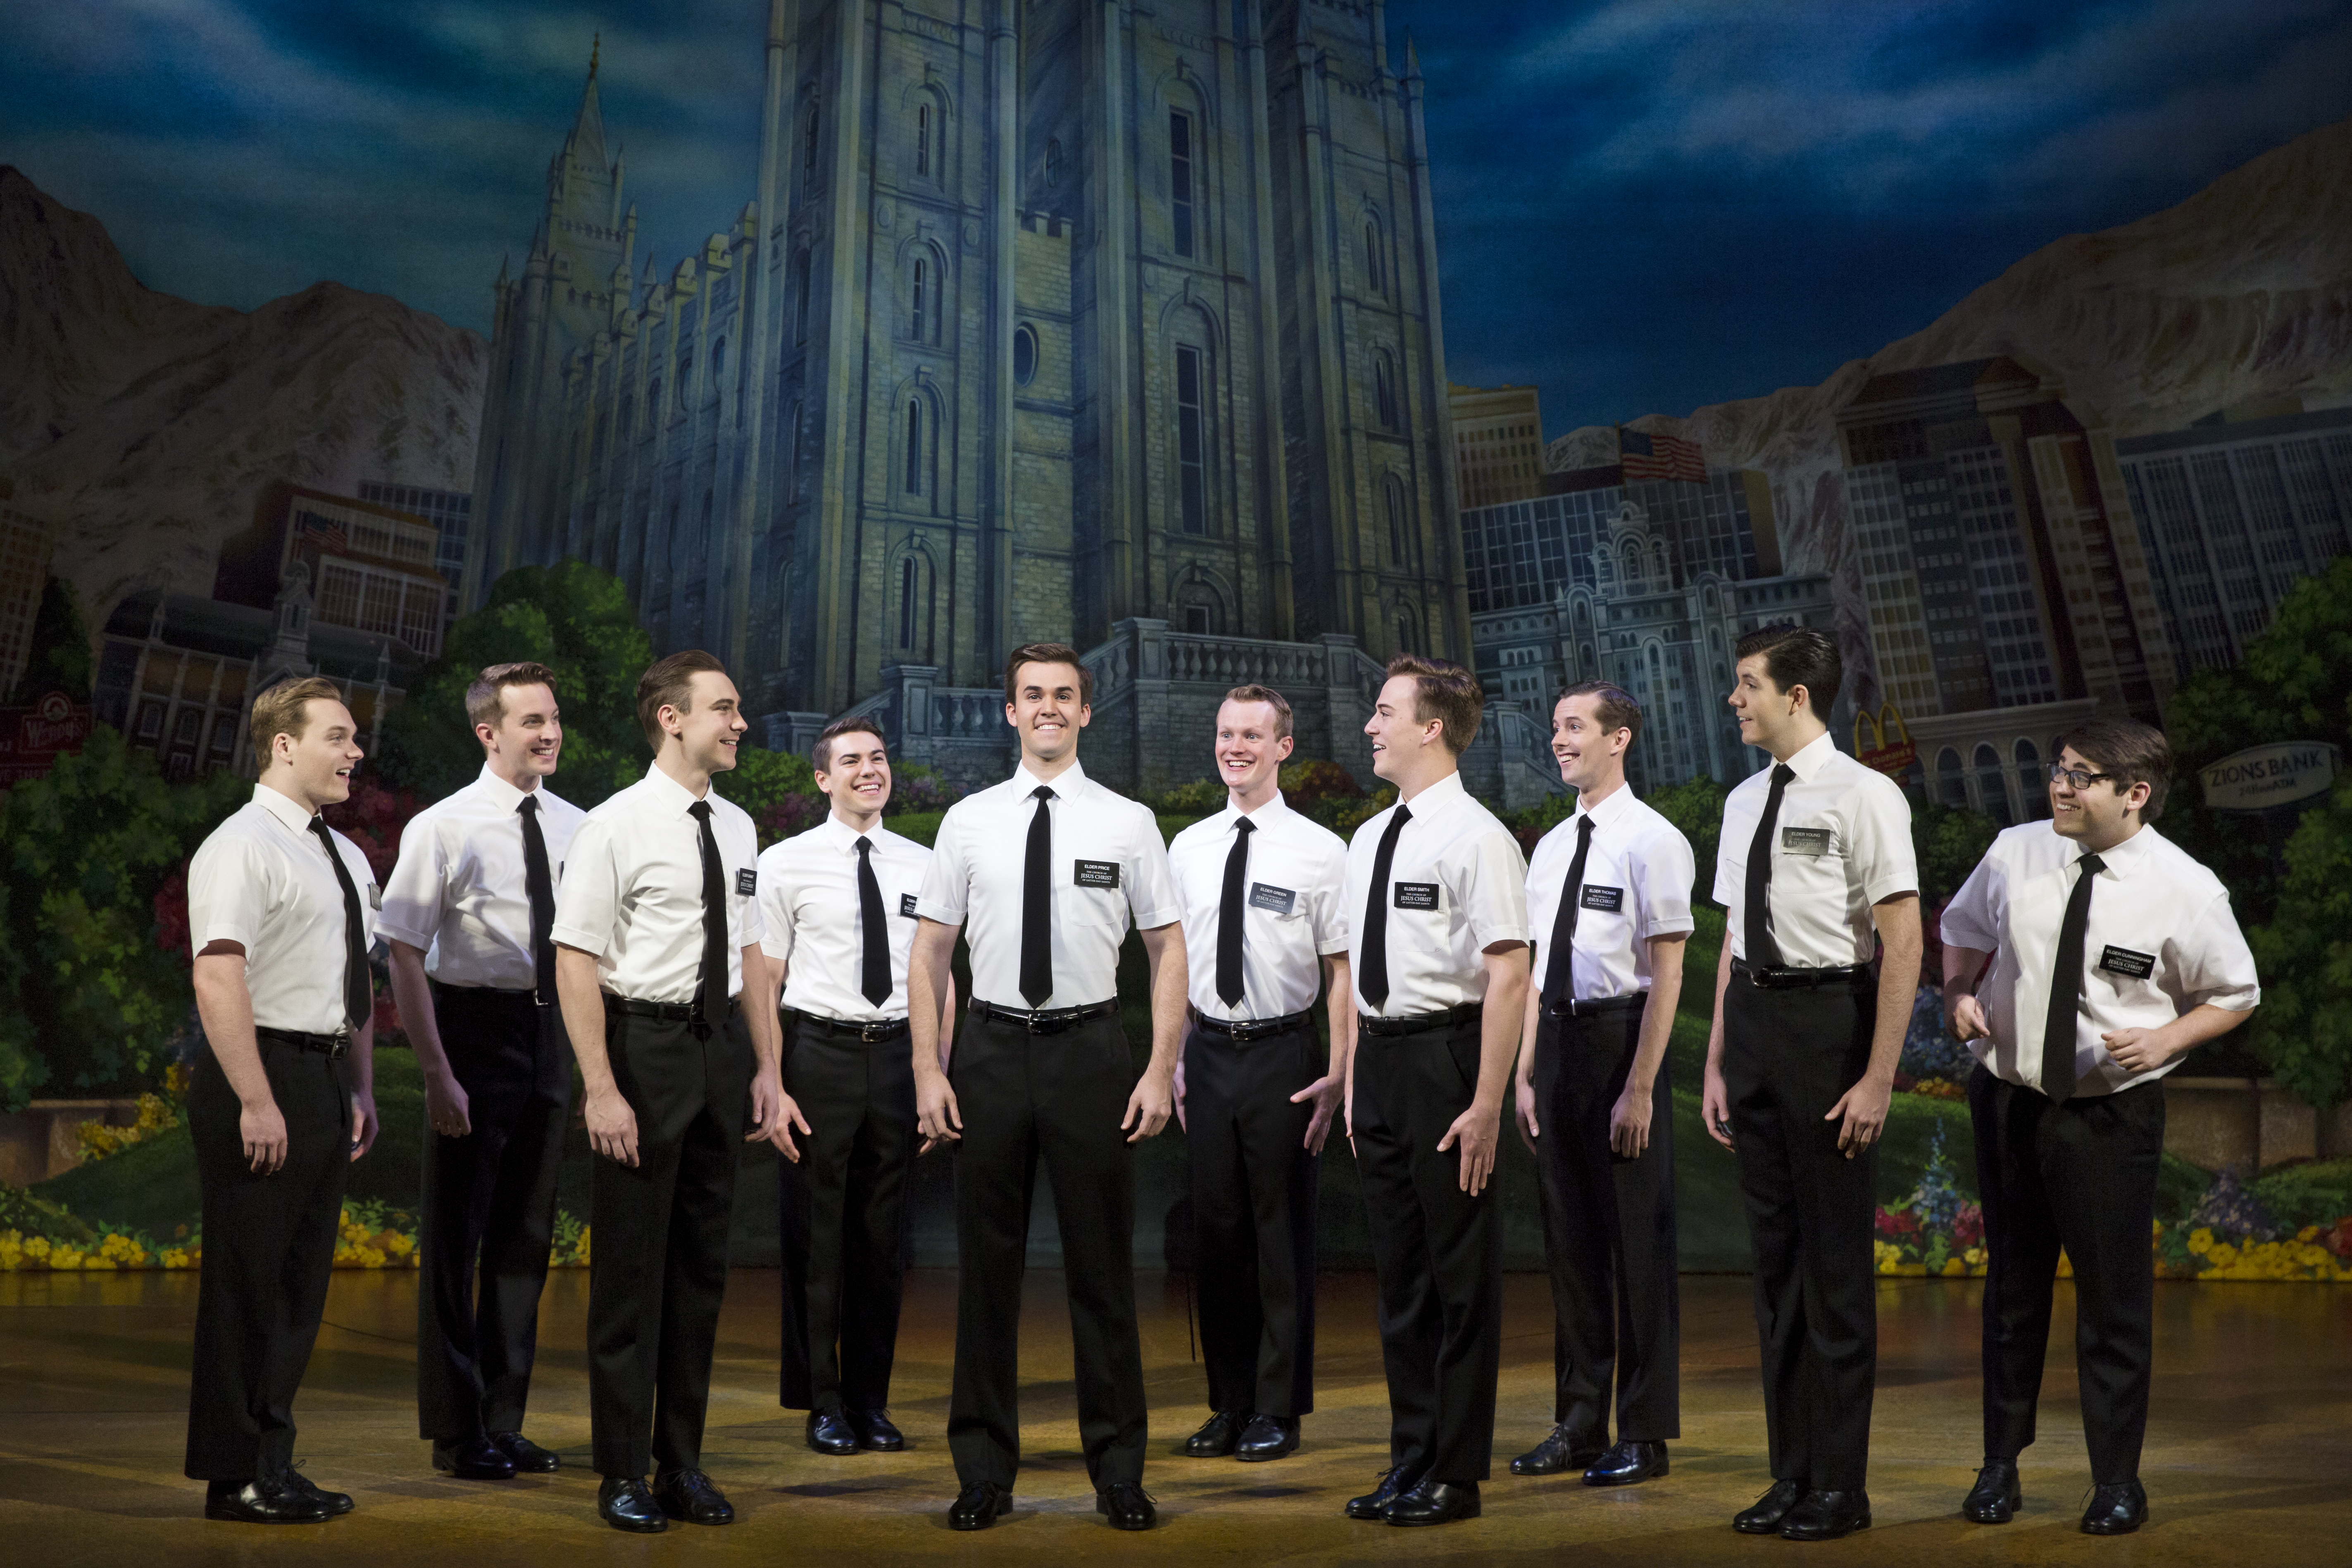 How much are tickets to see 'The Book of Mormon' on Broadway? 